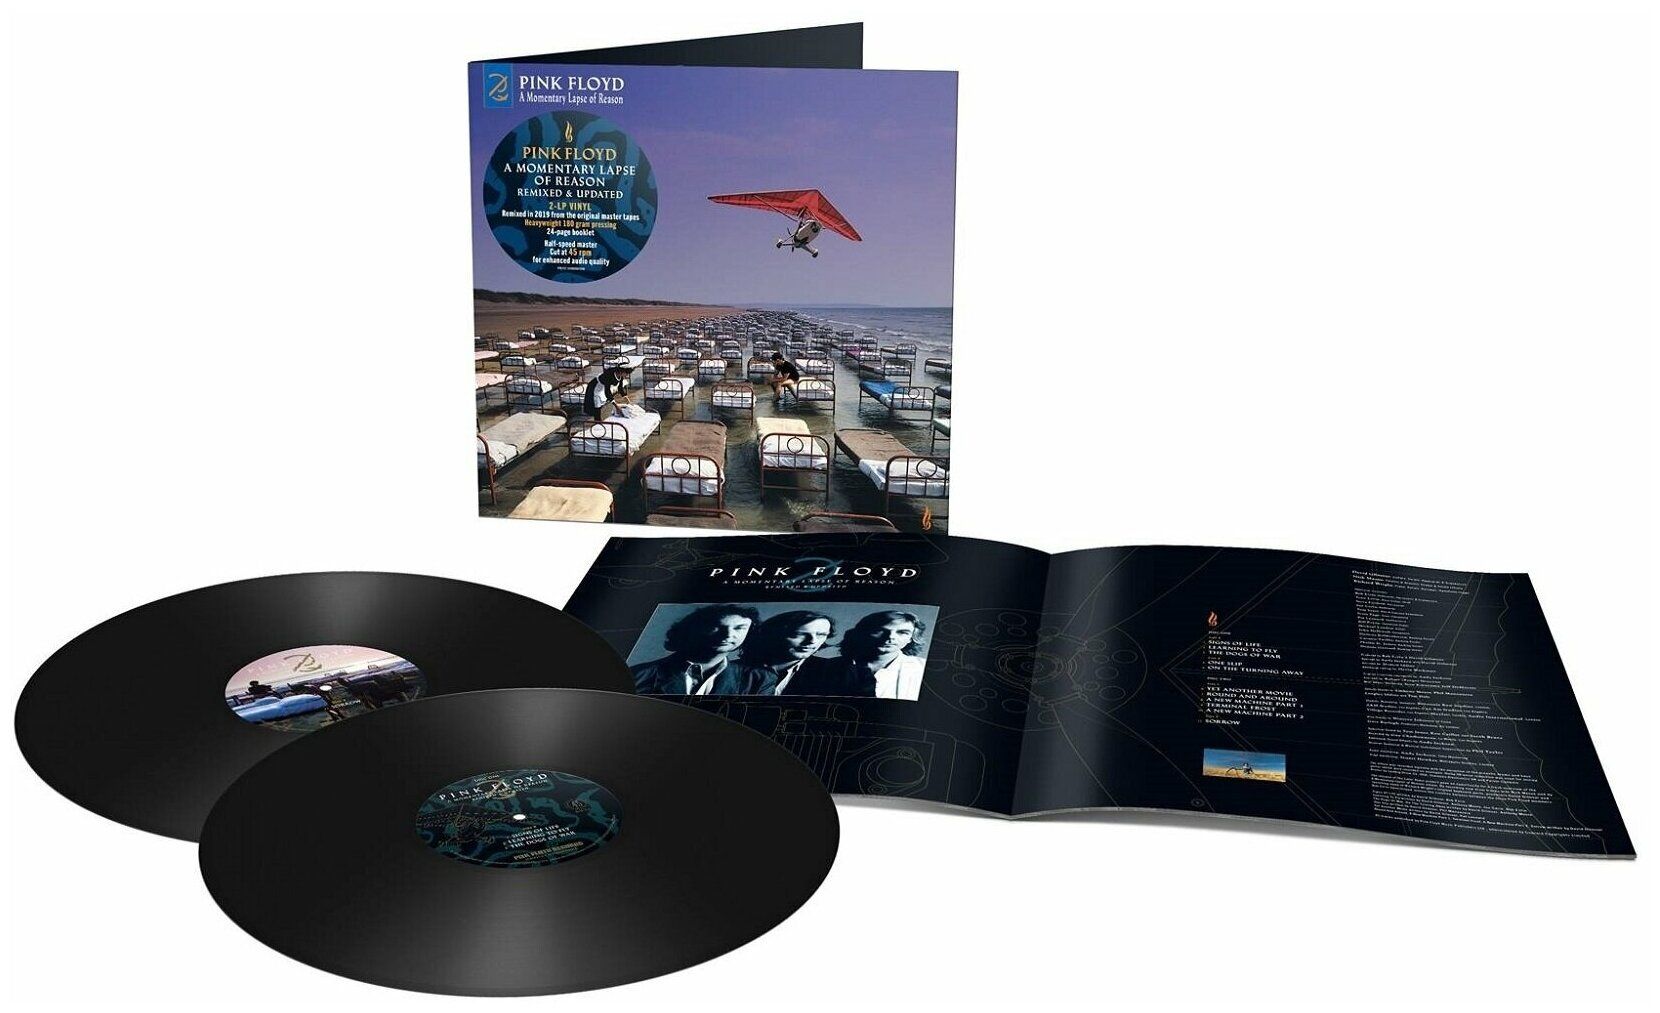 Виниловая пластинка Pink Floyd, A Momentary Lapse Of Reason (Remixed & Updated) (0190295079208) pink floyd best of the later years 1987 2019